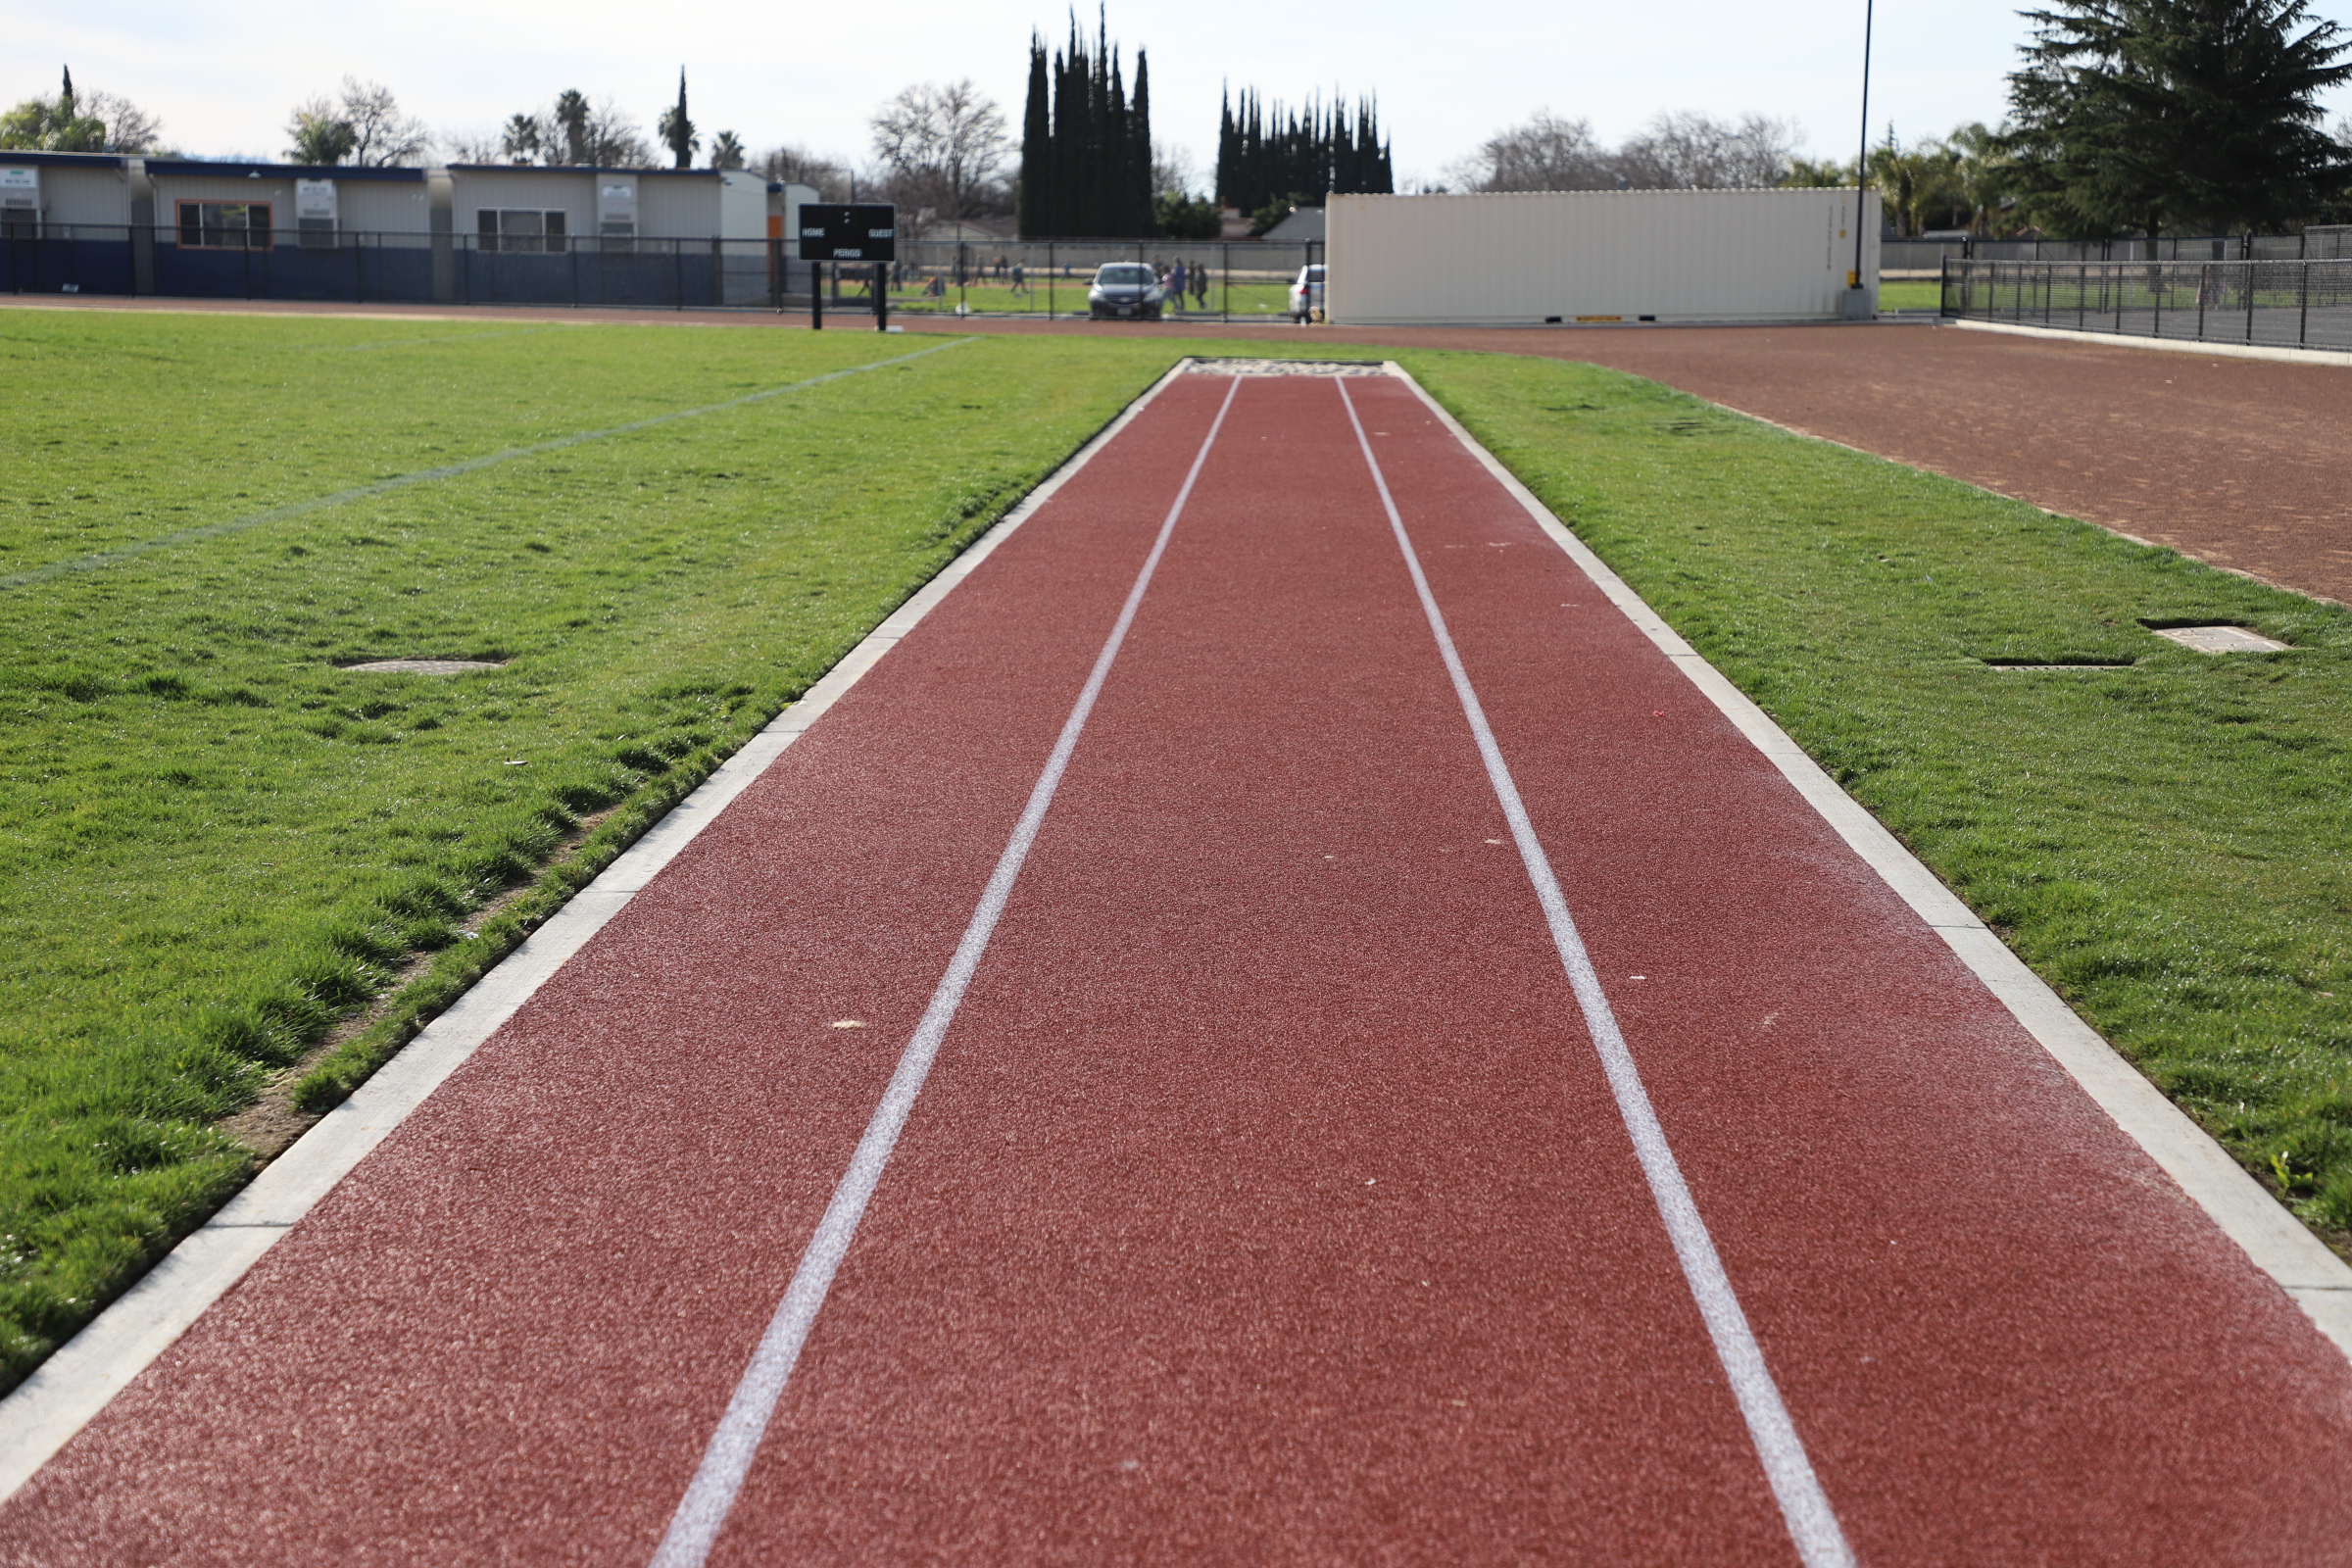 New track at Hanshaw Middle School